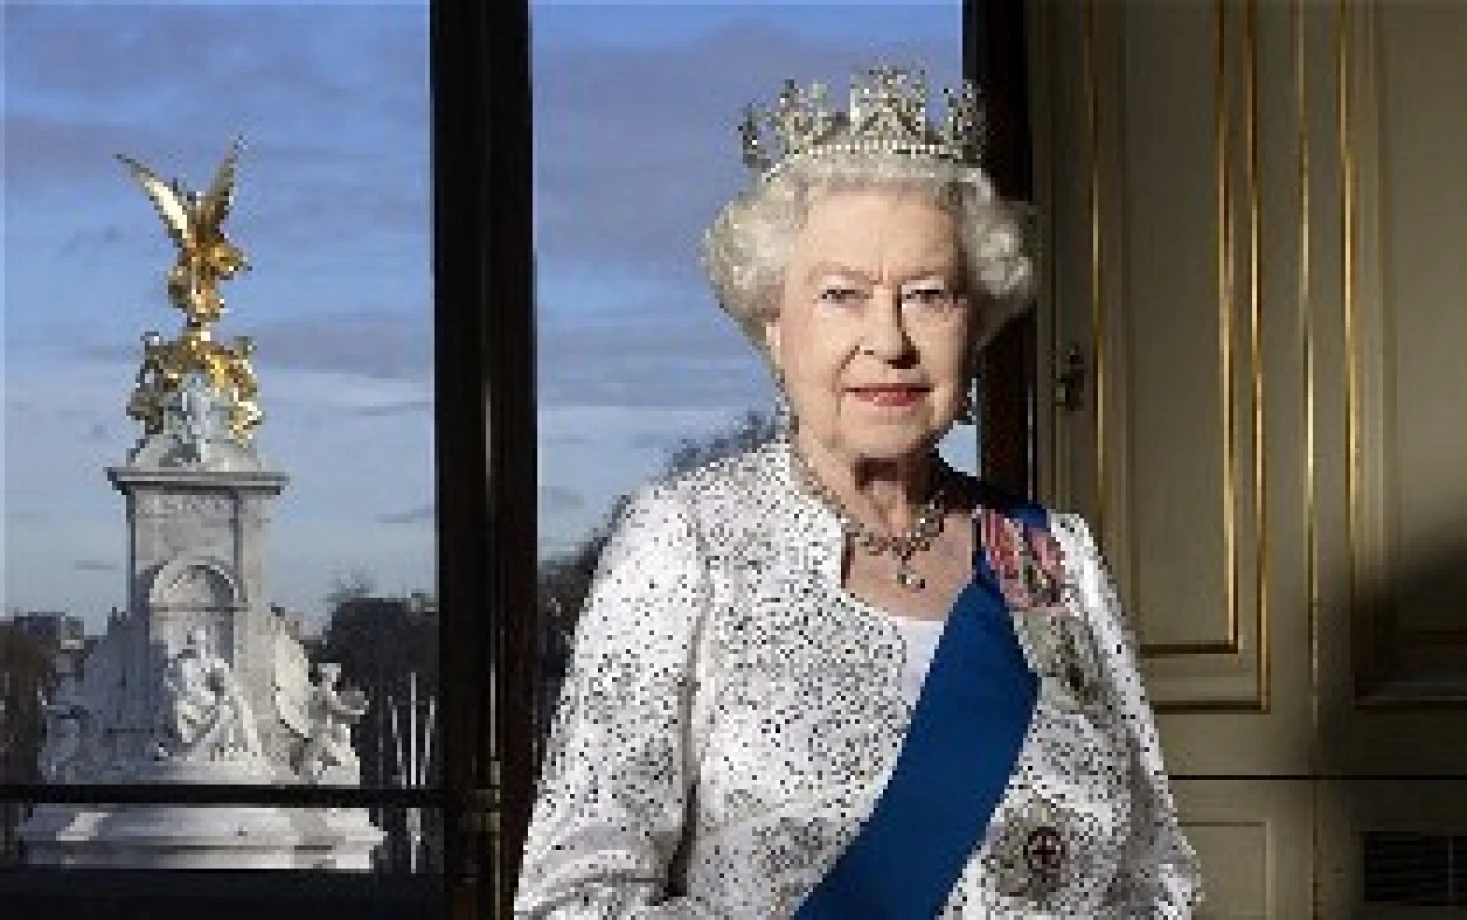 Congratulations to Her Majesty The Queen